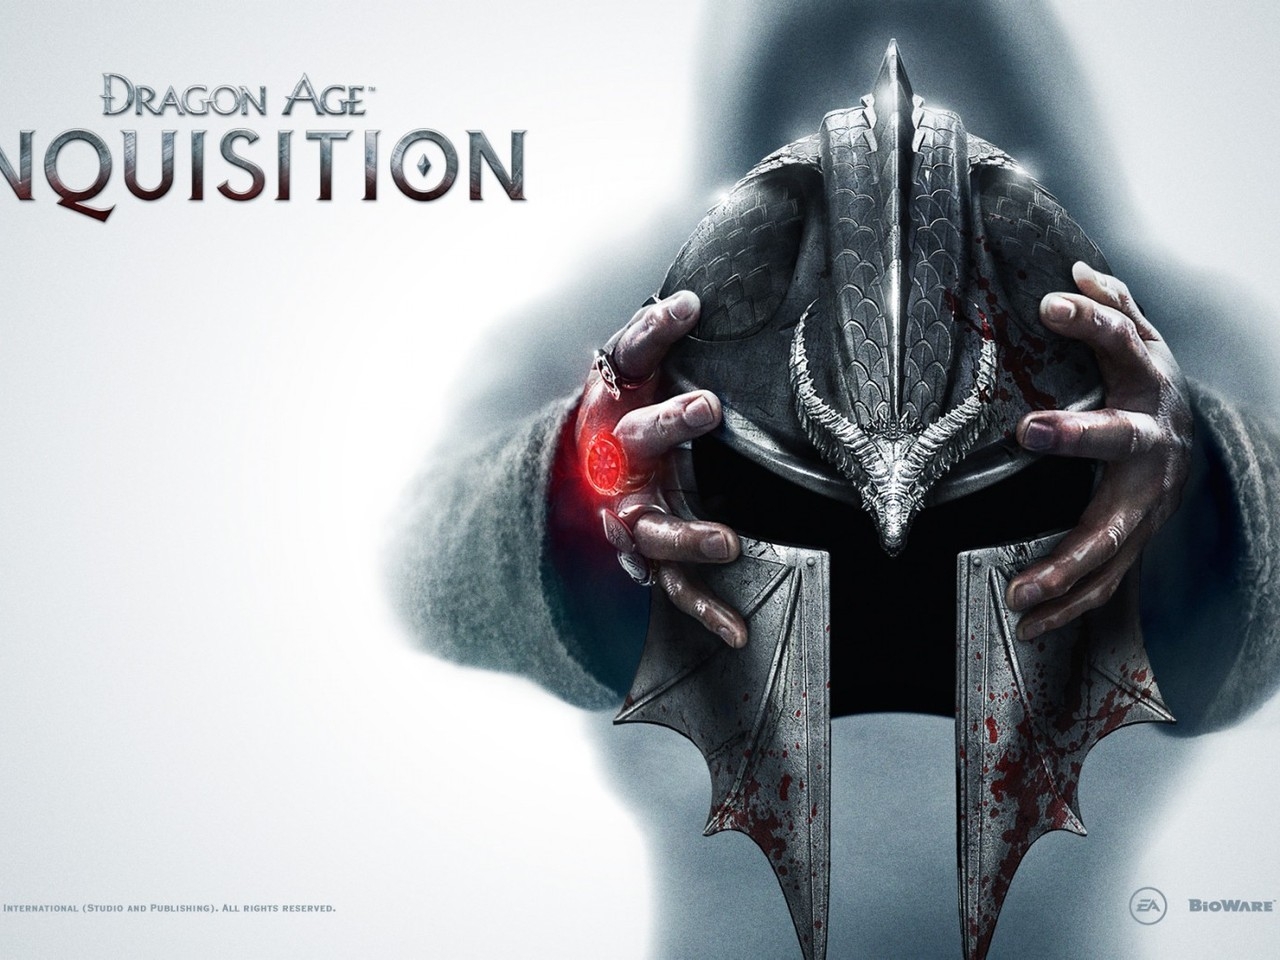 Dragon Age Inquisition Poster for 1280 x 960 resolution